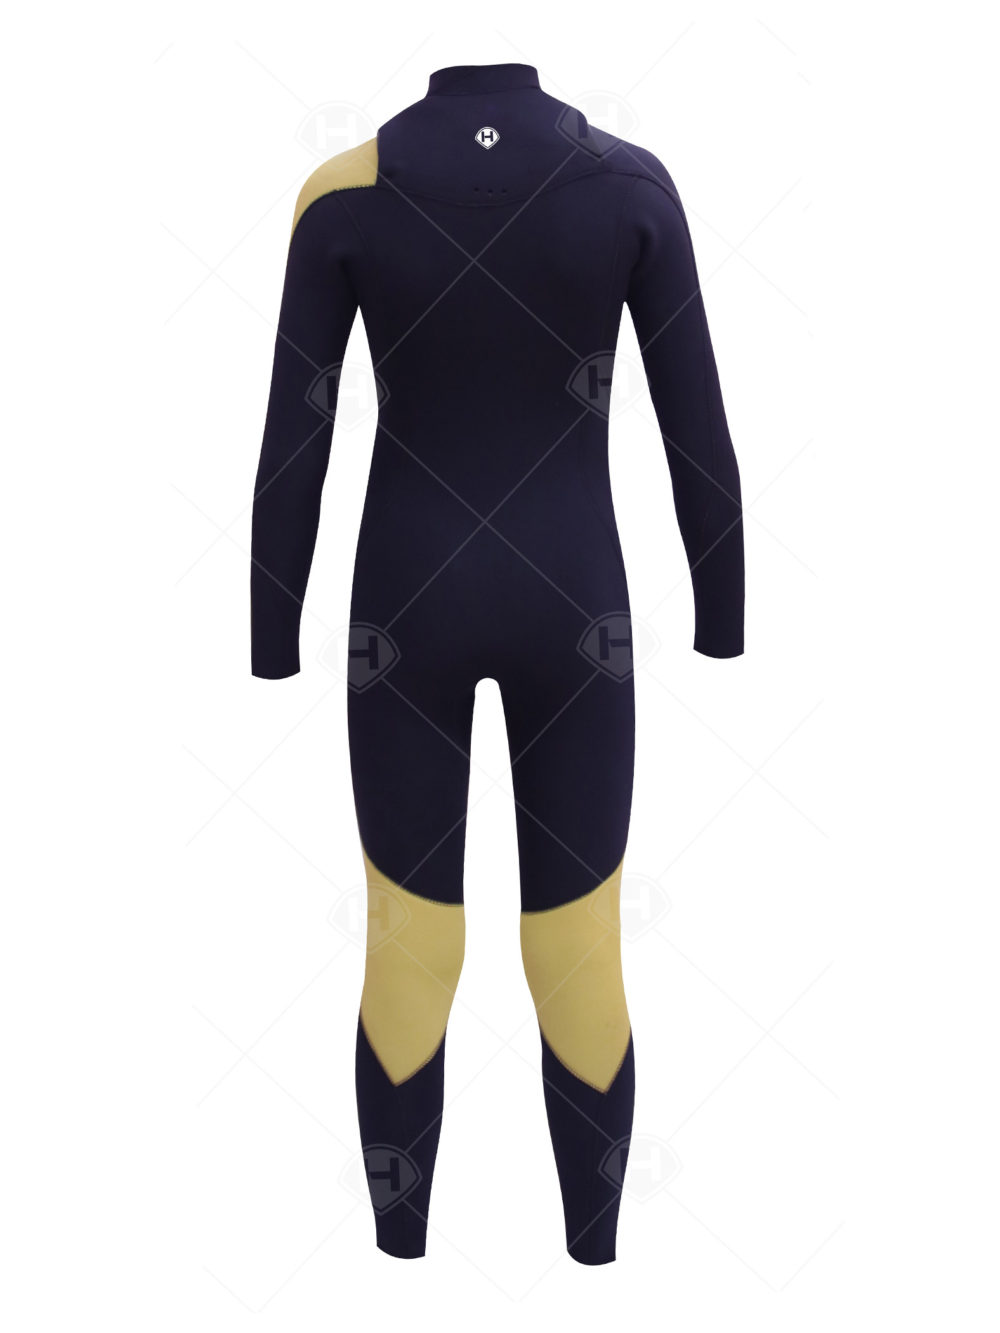 Front Entry Wetsuit